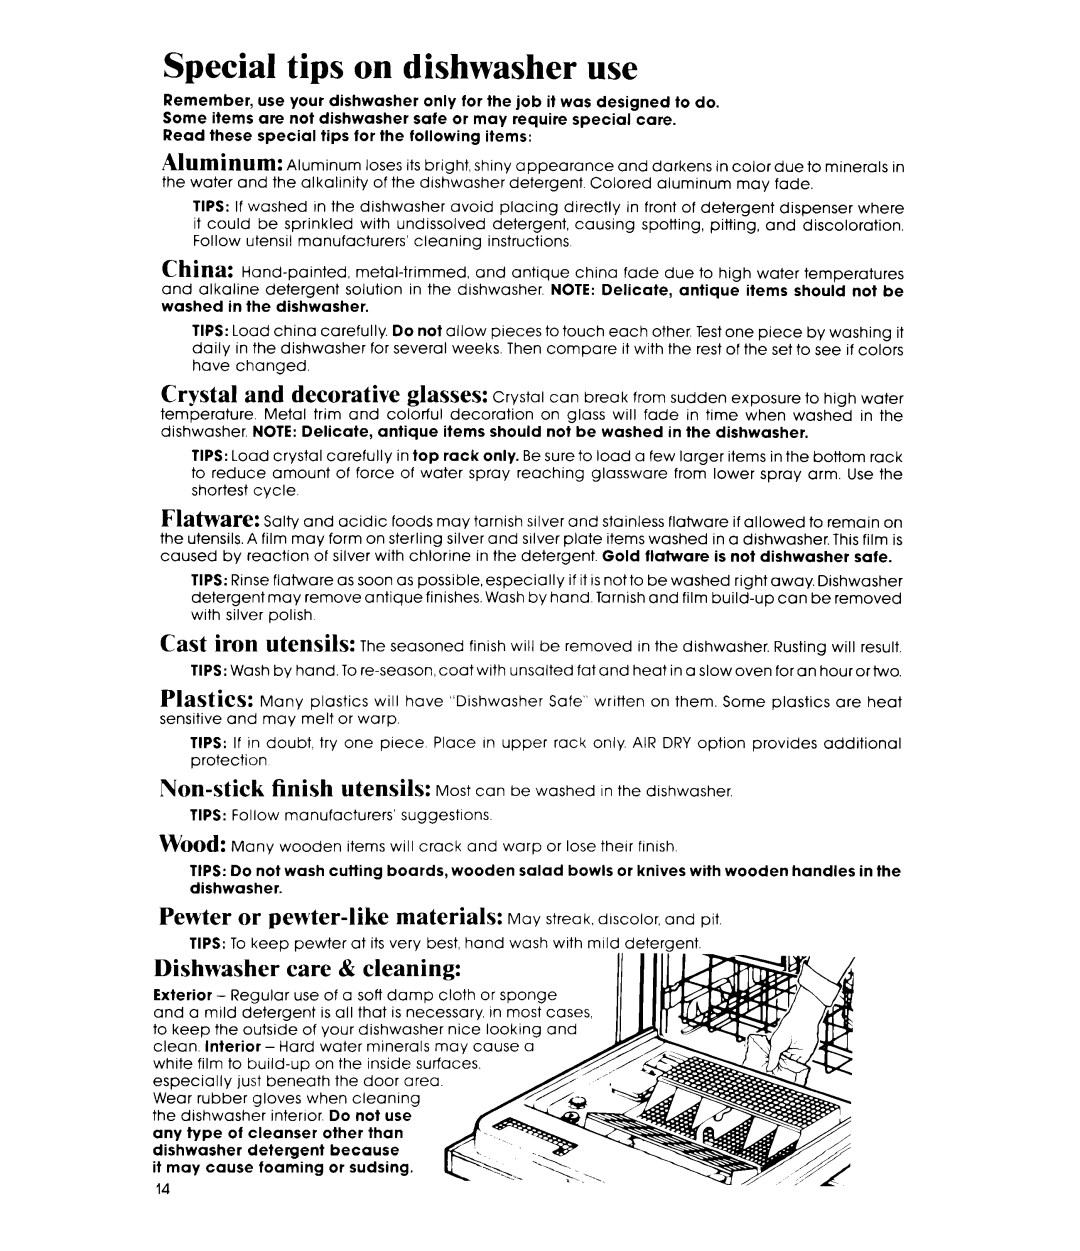 Whirlpool DU9700XT manual Special tips on dishwasher use, Non-stickfinish UteUSilS, Dishwasher care & cleaning 